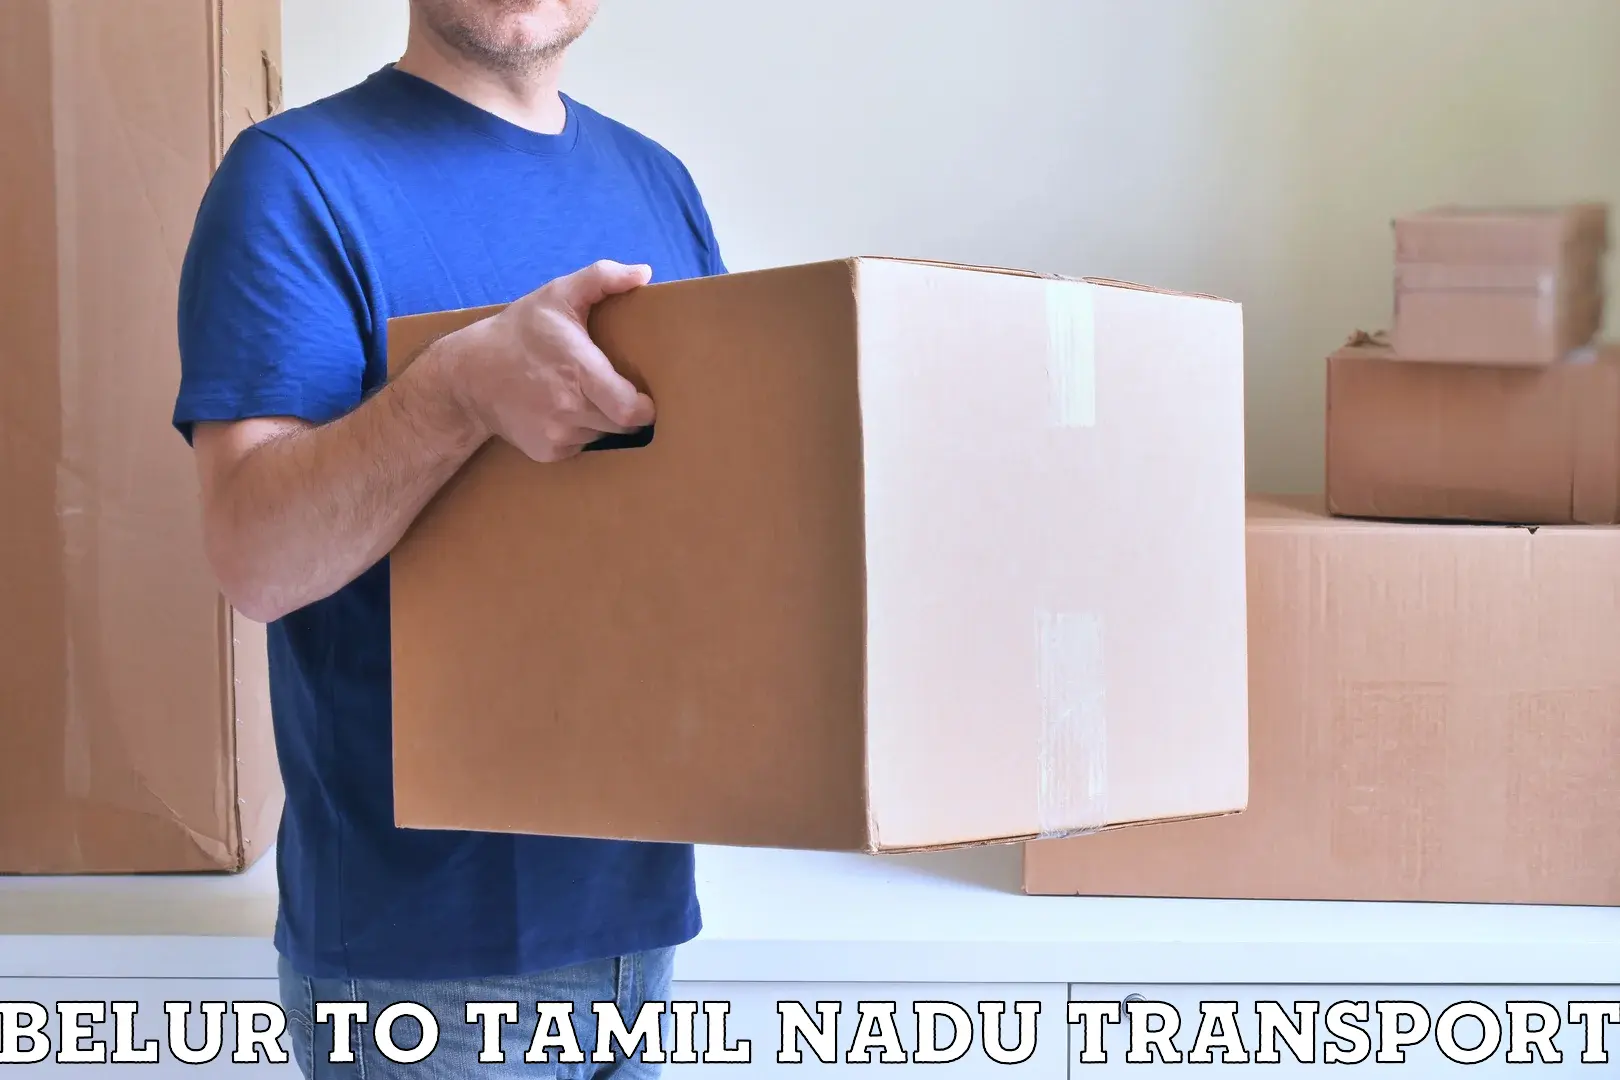 Transport bike from one state to another Belur to Tamil Nadu